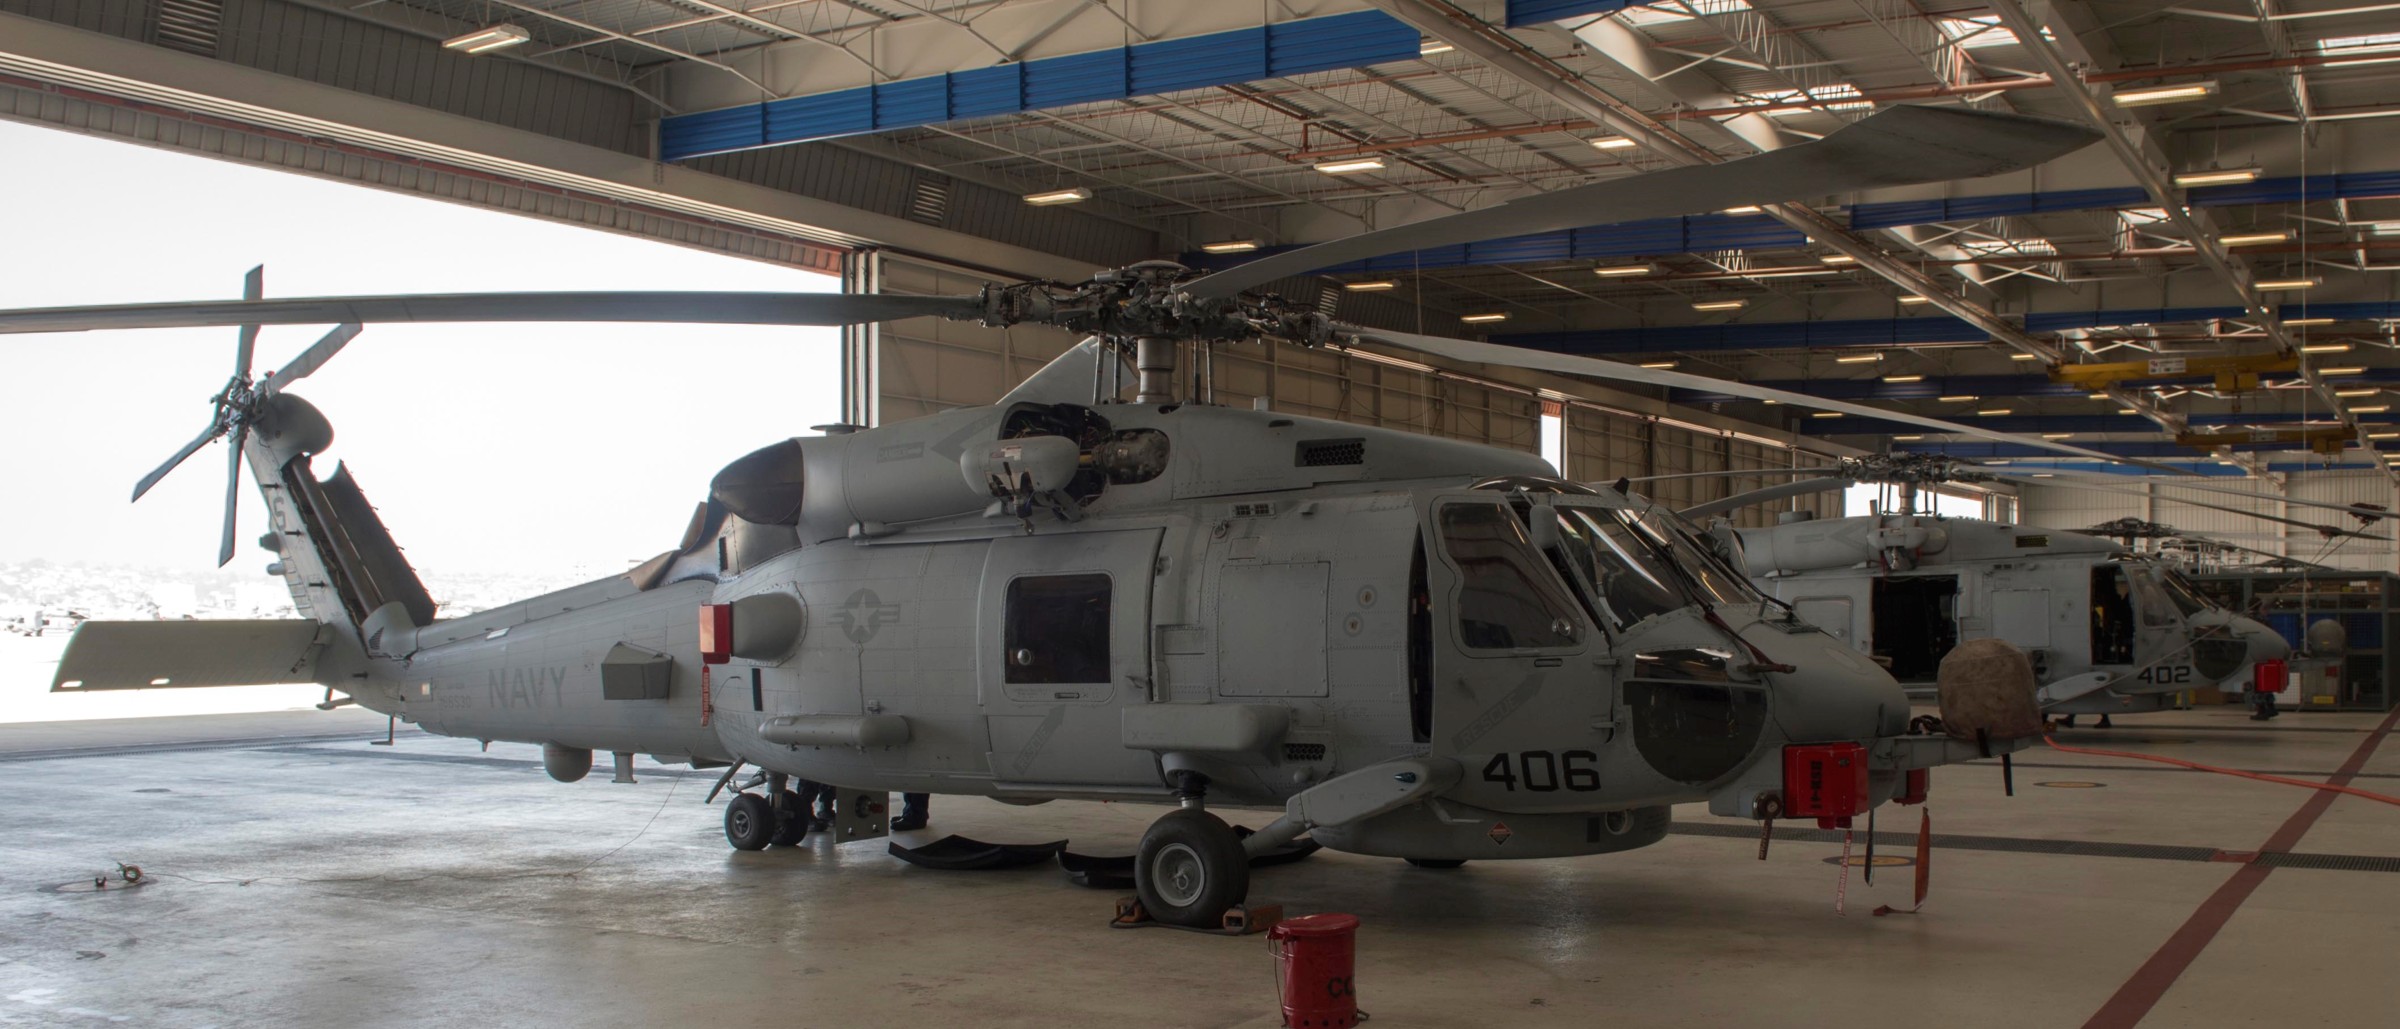 hsm-41 seahawks helicopter maritime strike squadron mh-60r fleet replacement navy 2015 02 nas north island